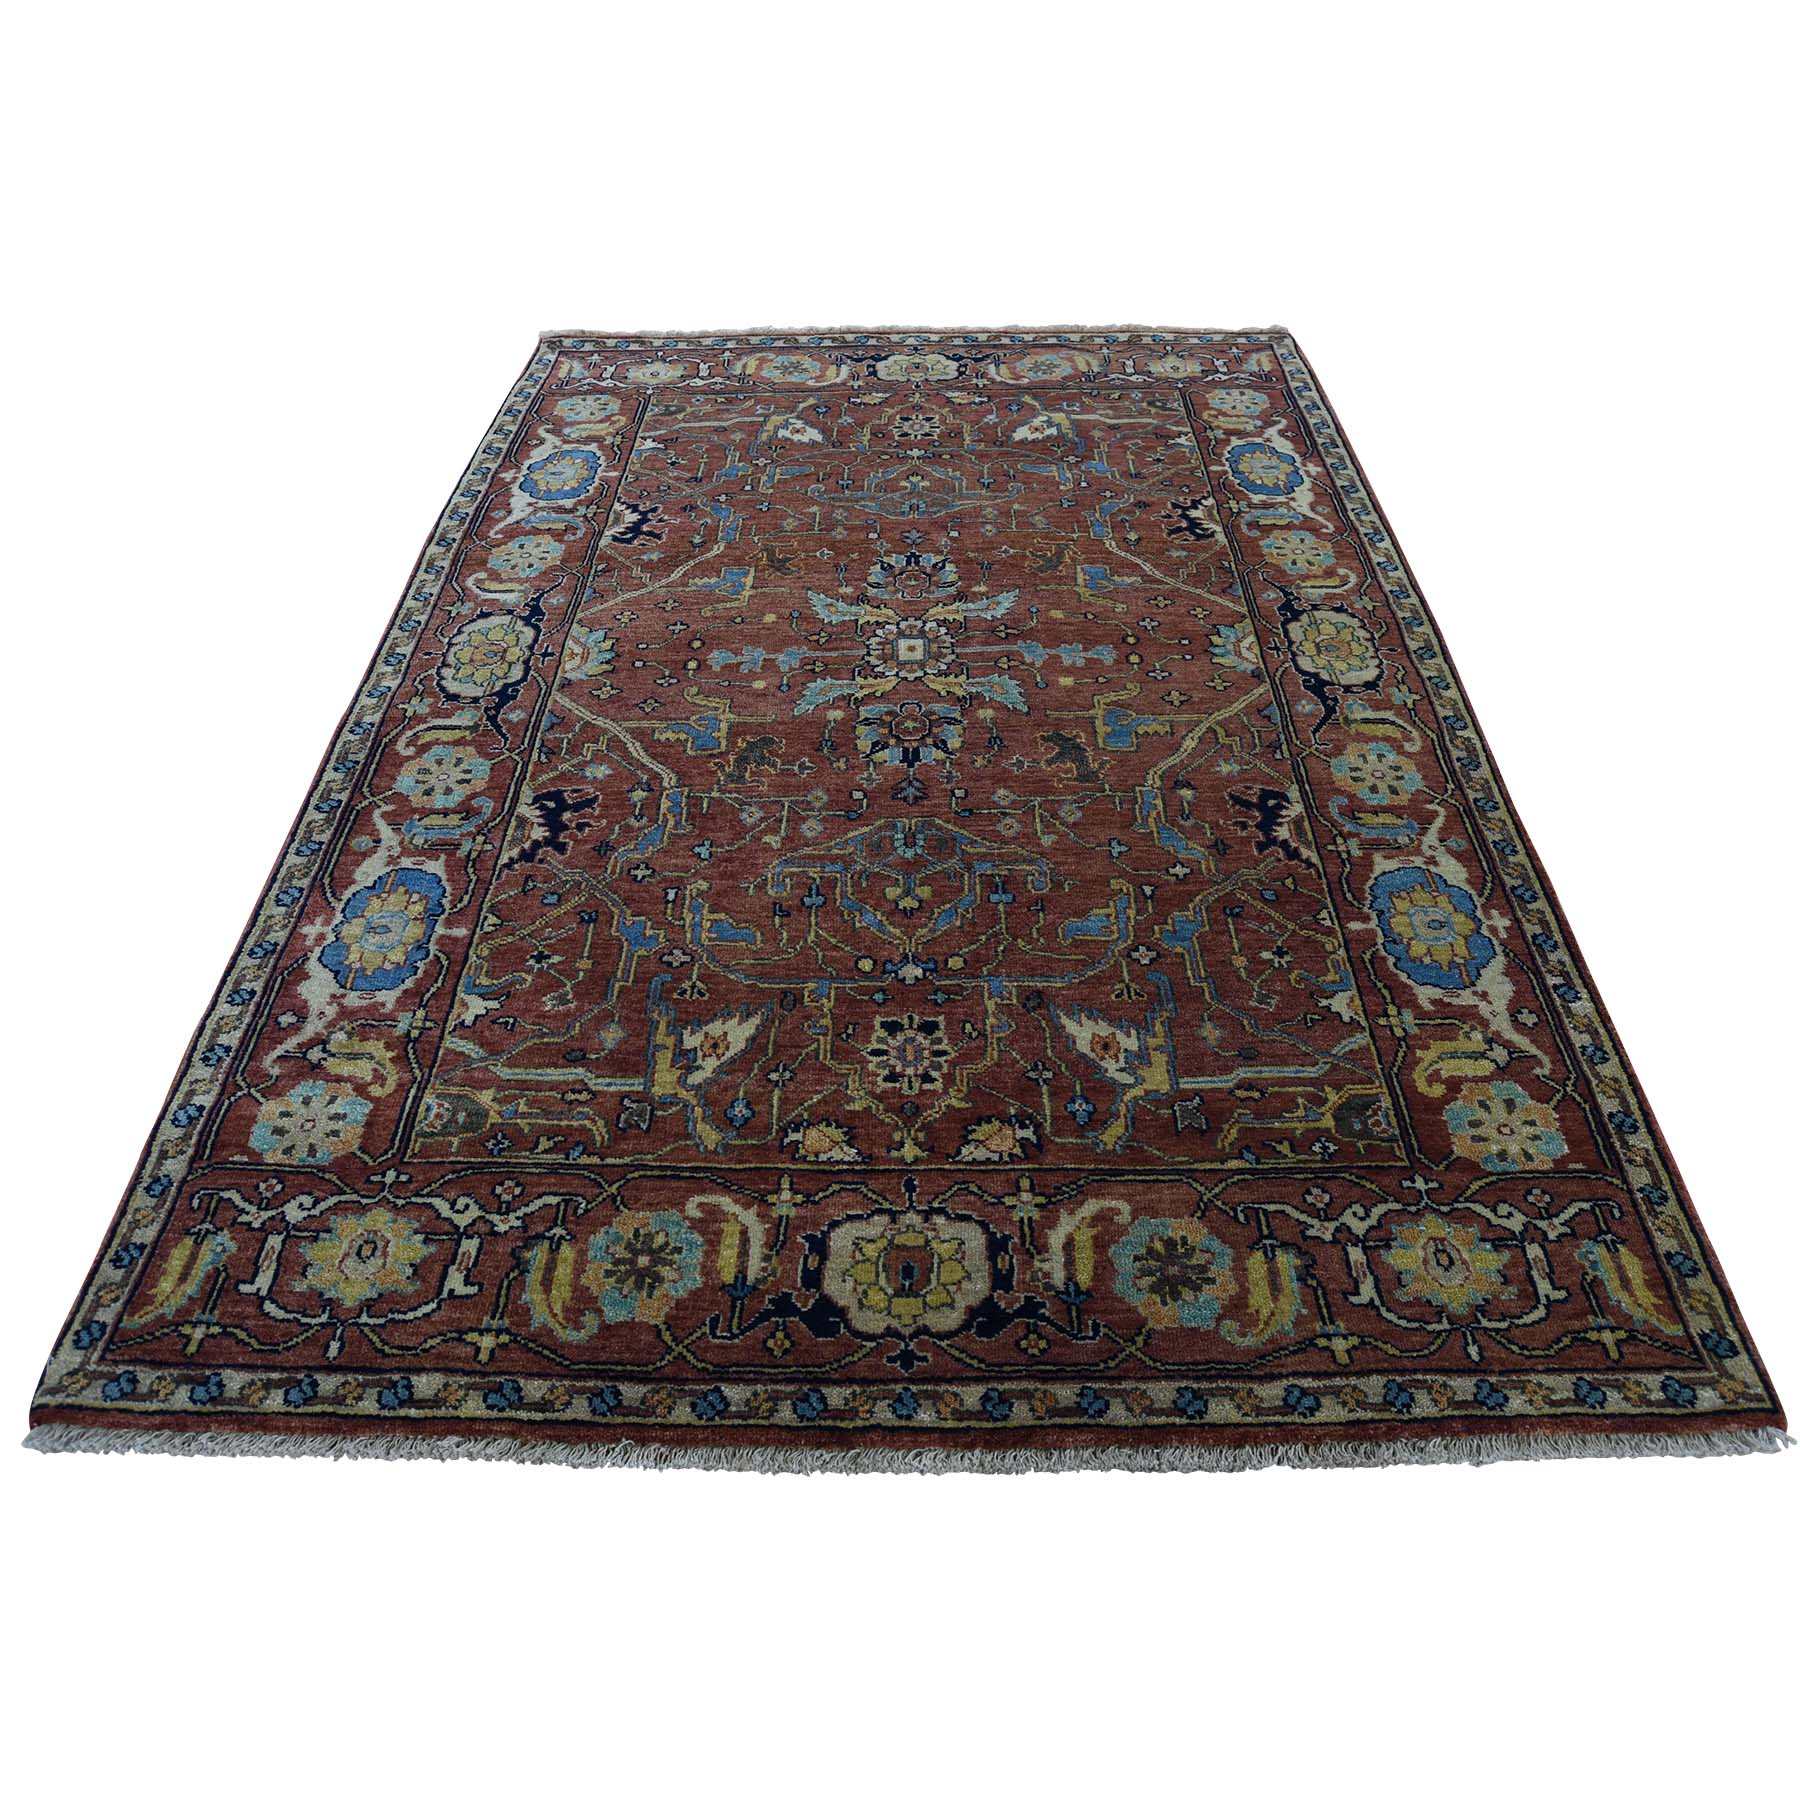 3'10"x6' Antiqued Heriz Re-Creation All Over Design Hand Woven Rug 